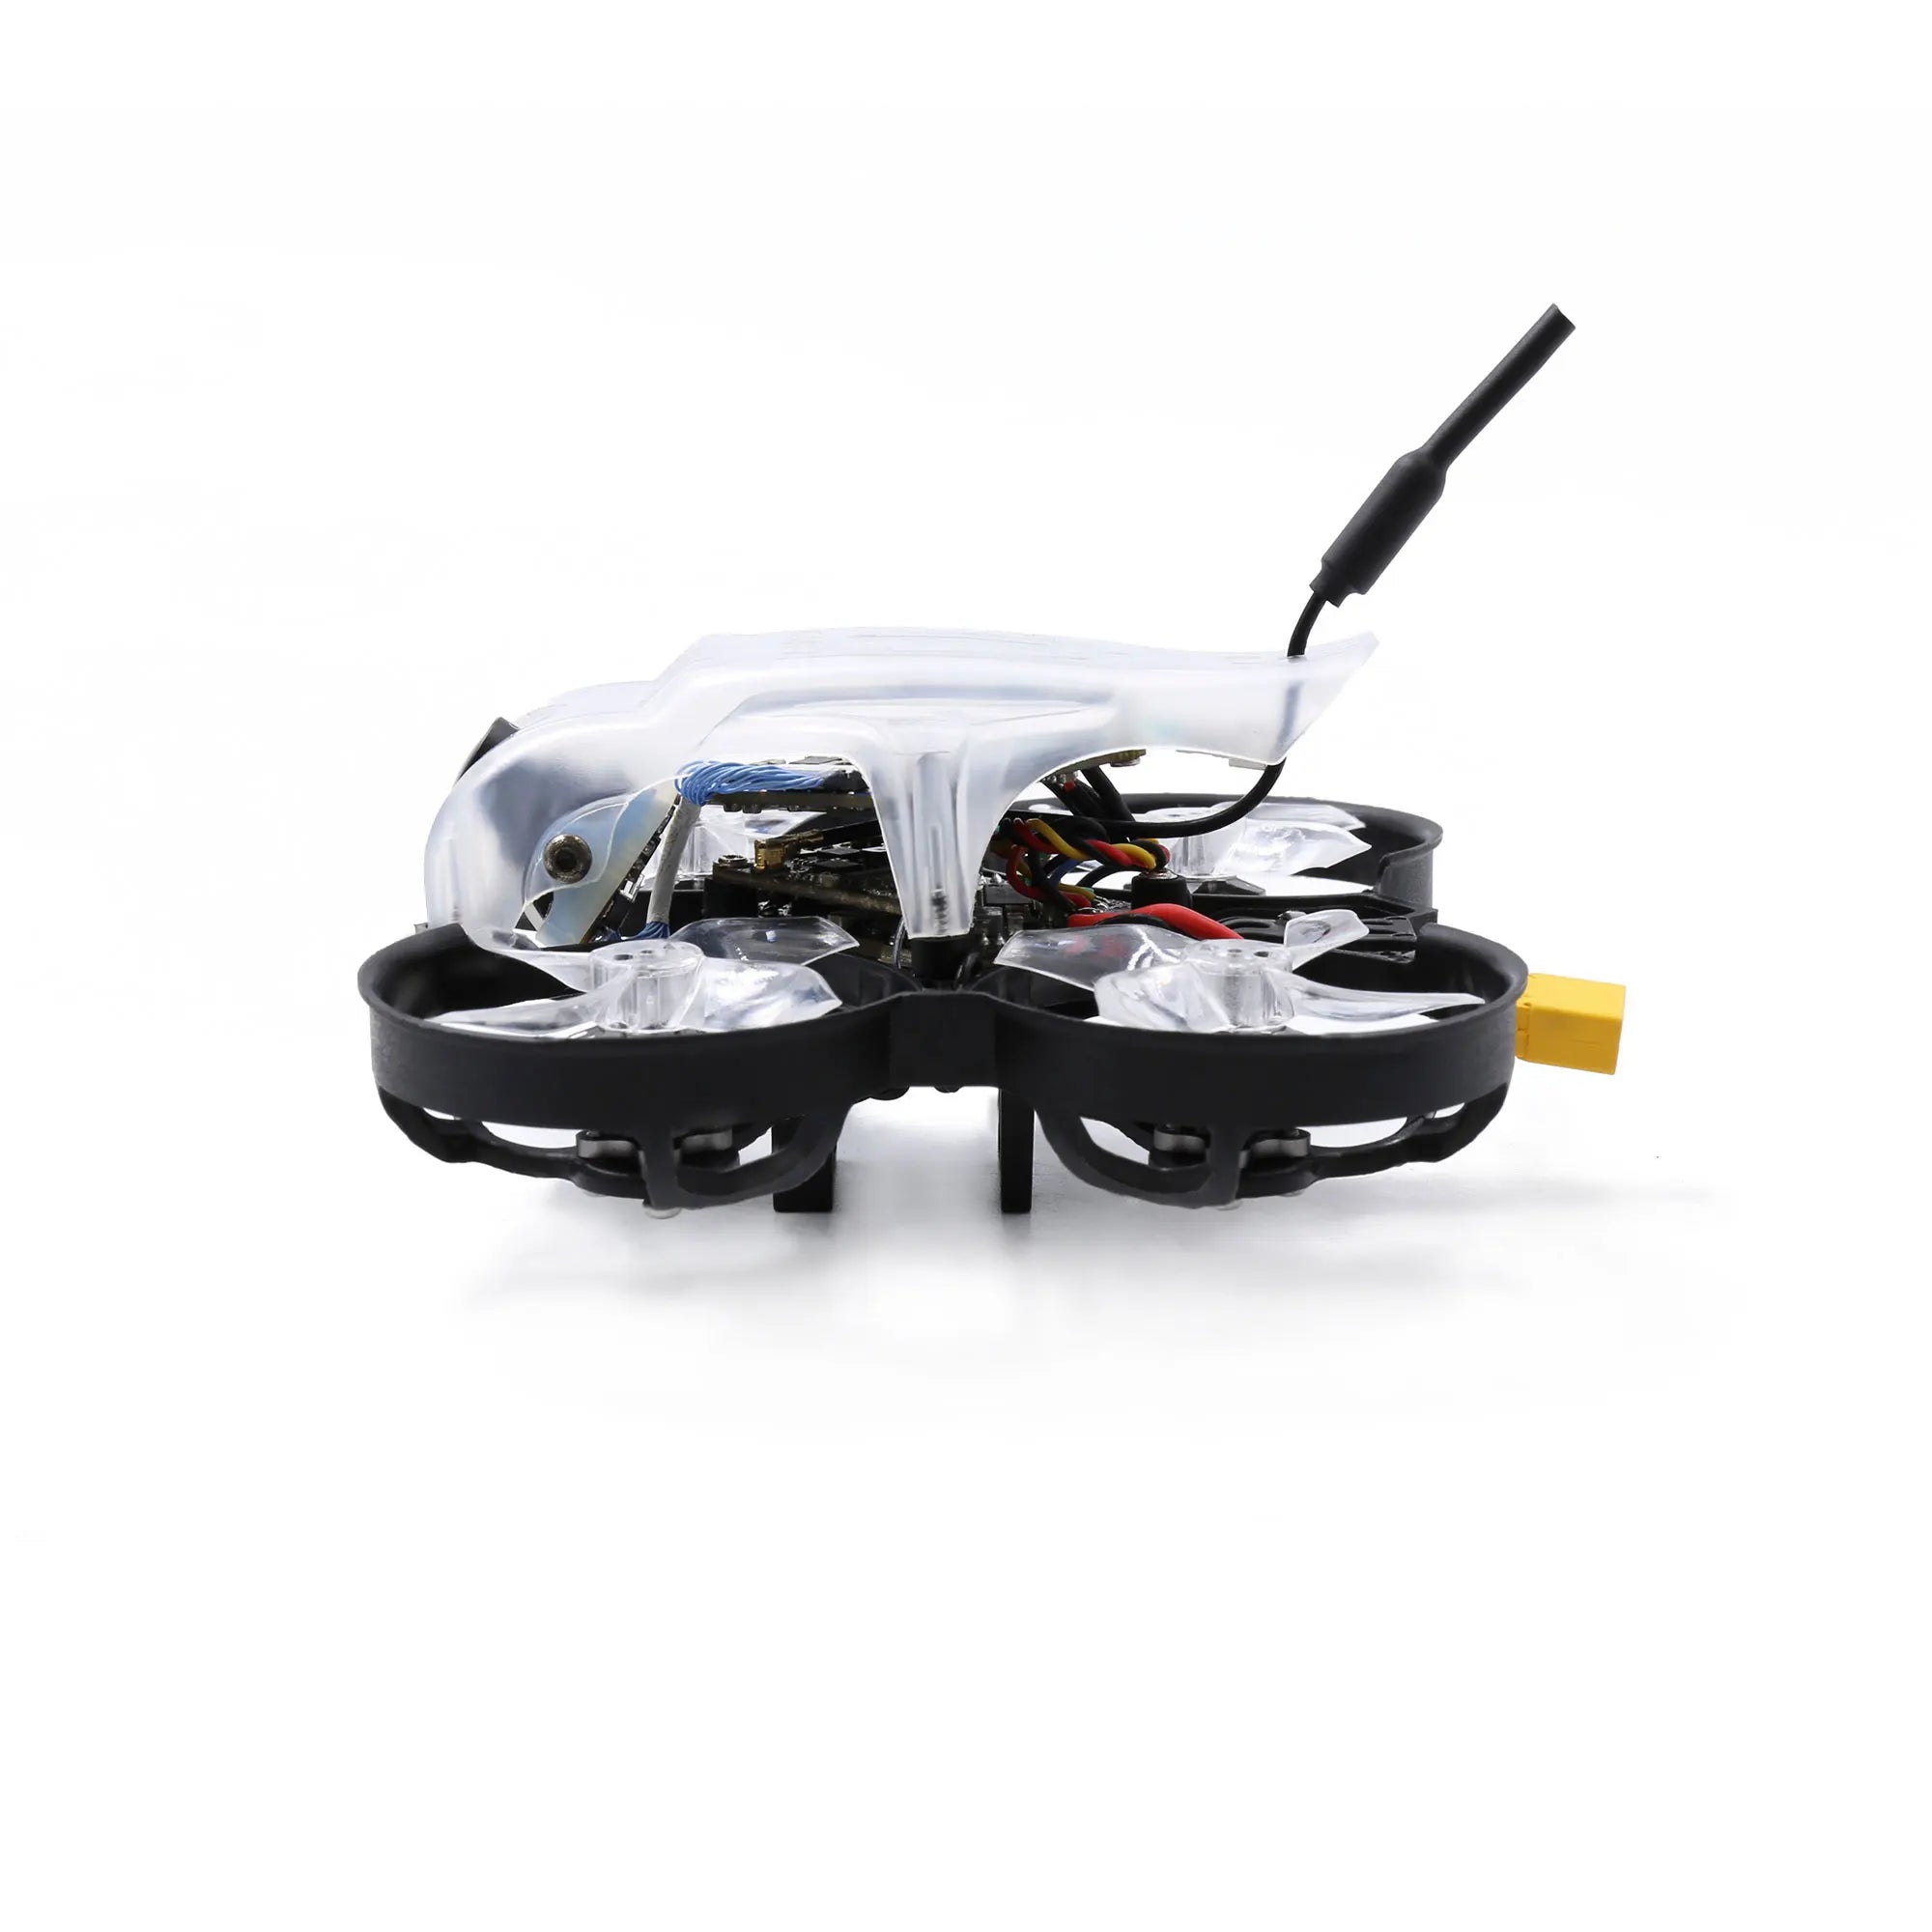 GEPRC Thinking P16 FPV Drone, Thinking P16 HD has been pre-tuned and fully assembled by the GEPRC